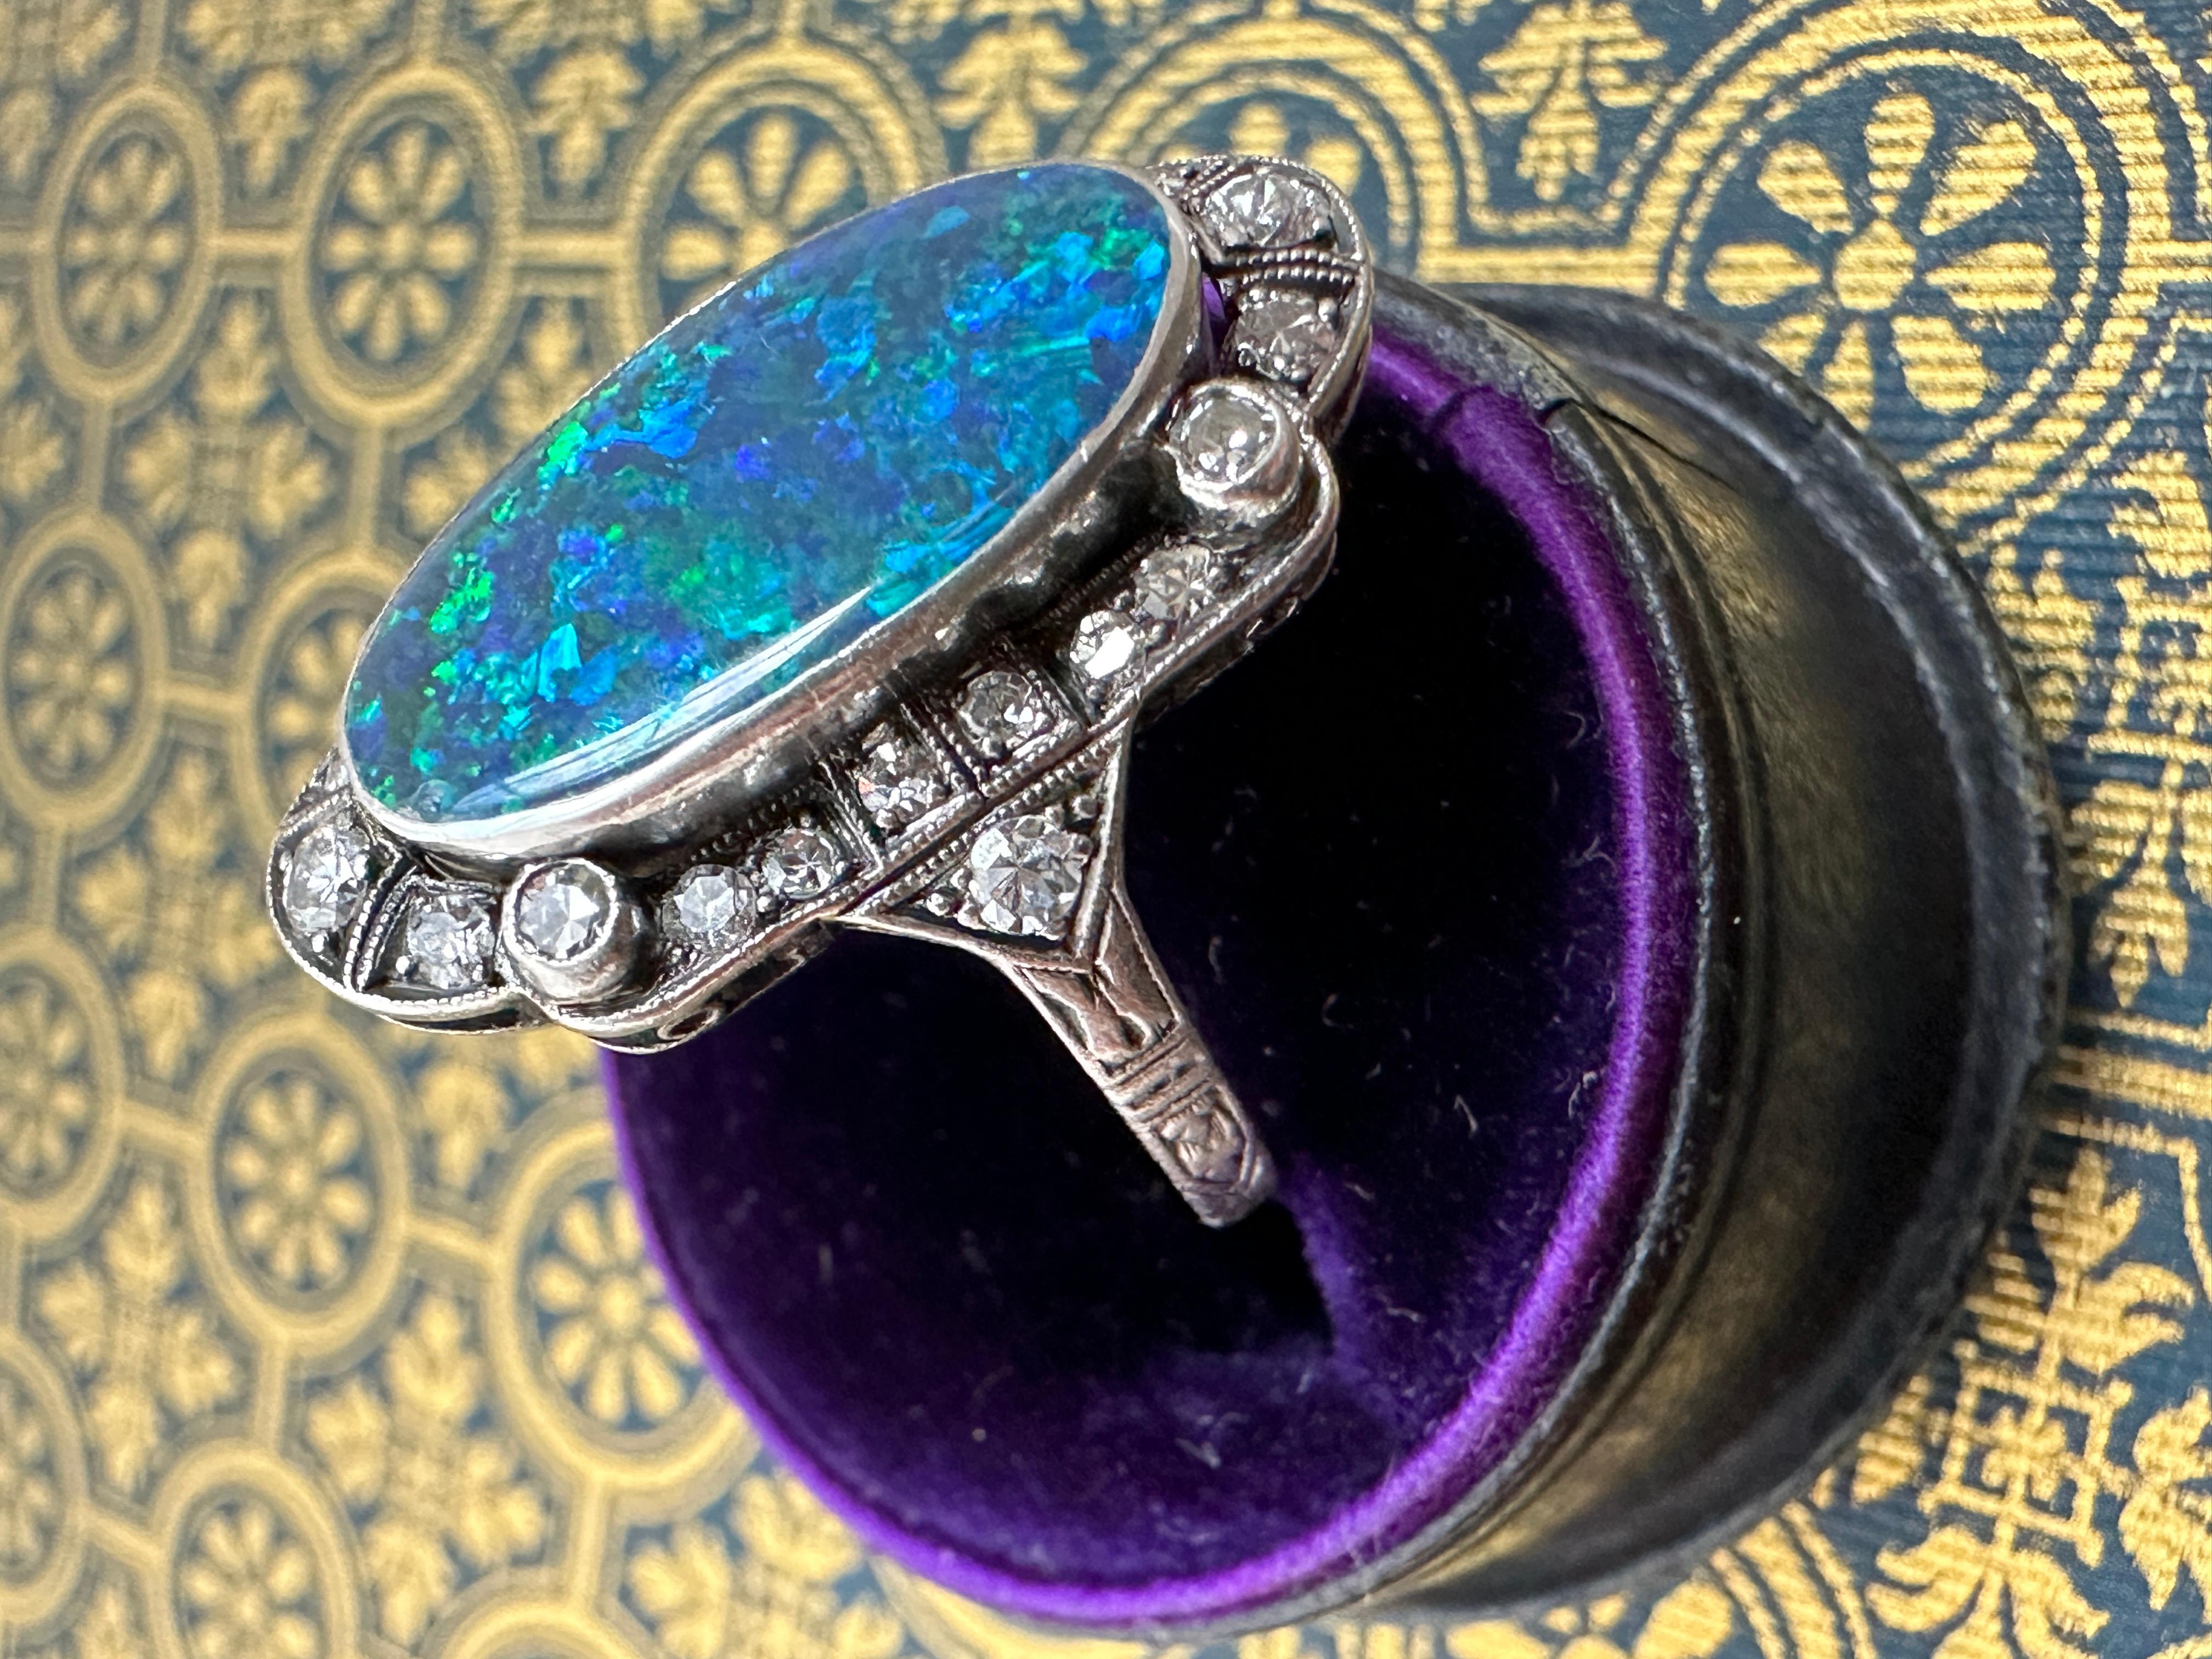 This magical Art Deco ring features a large black opal that shimmers with an ethereal play of colors, casting hues of bright cobalt blue, turquoise and neon green and yellow that shift as you move your hand. Hand crafted in platinum, the opal is